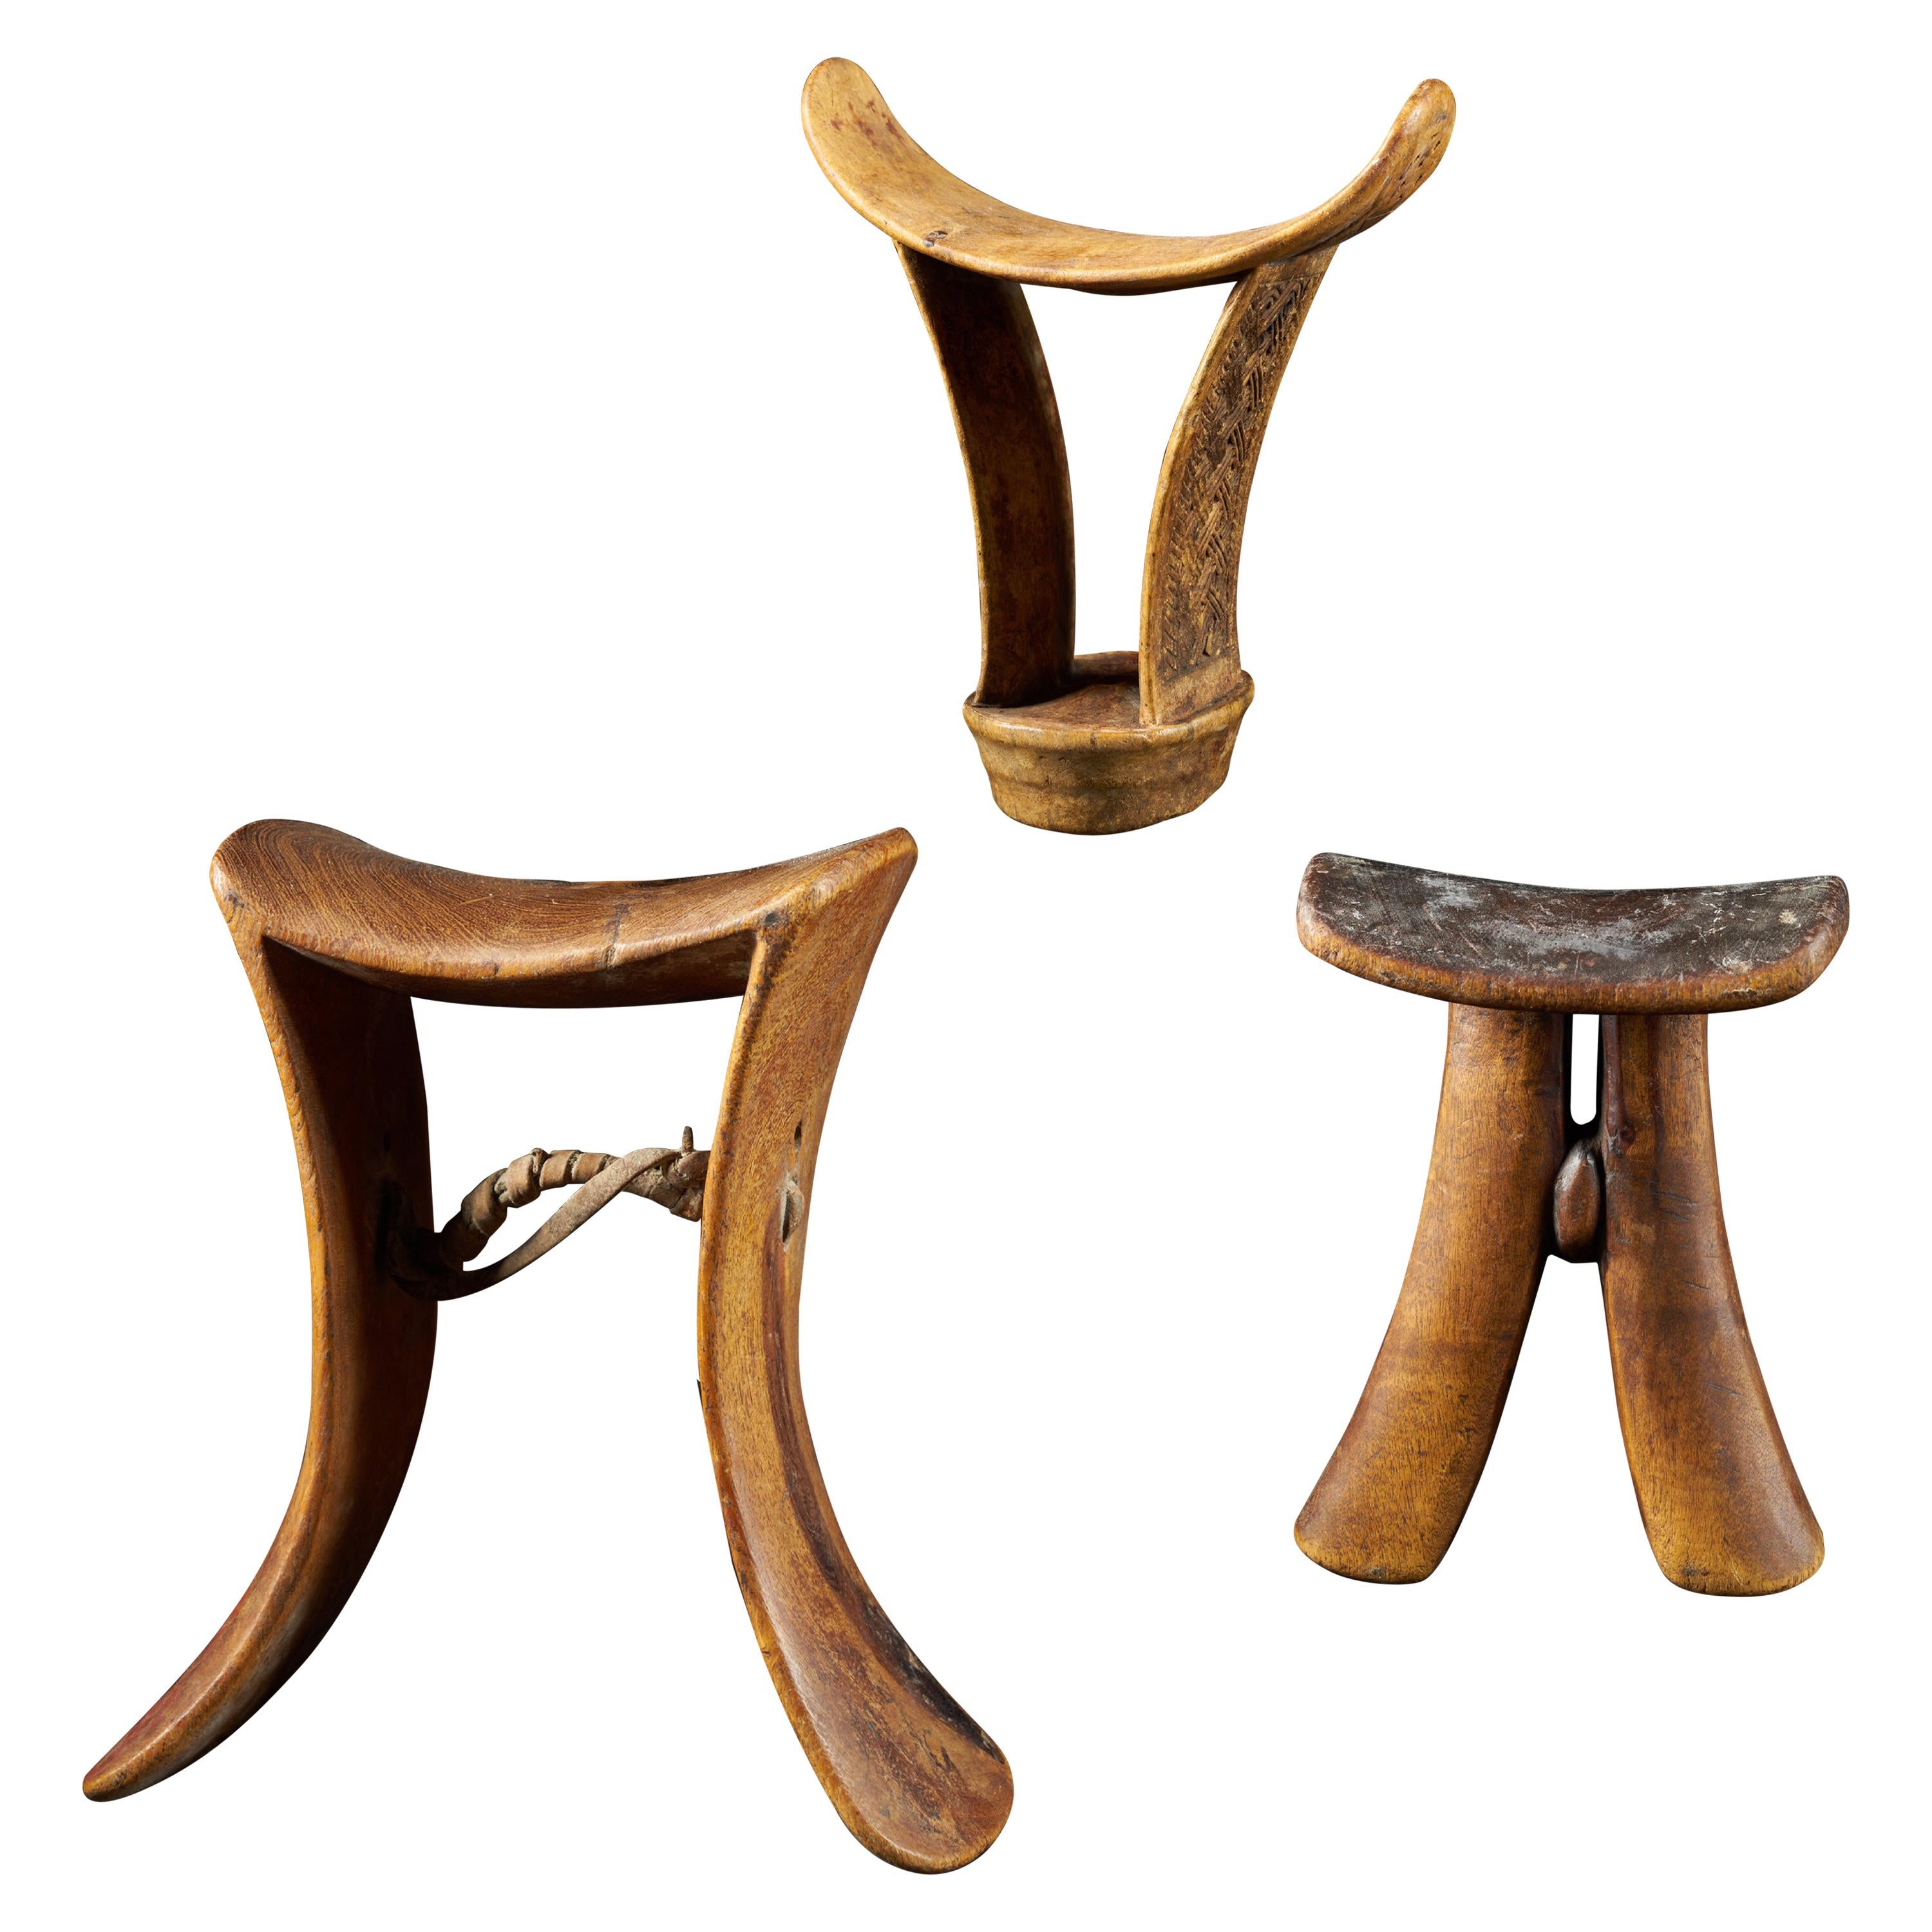 Set of 3 Neckrests from East Africa